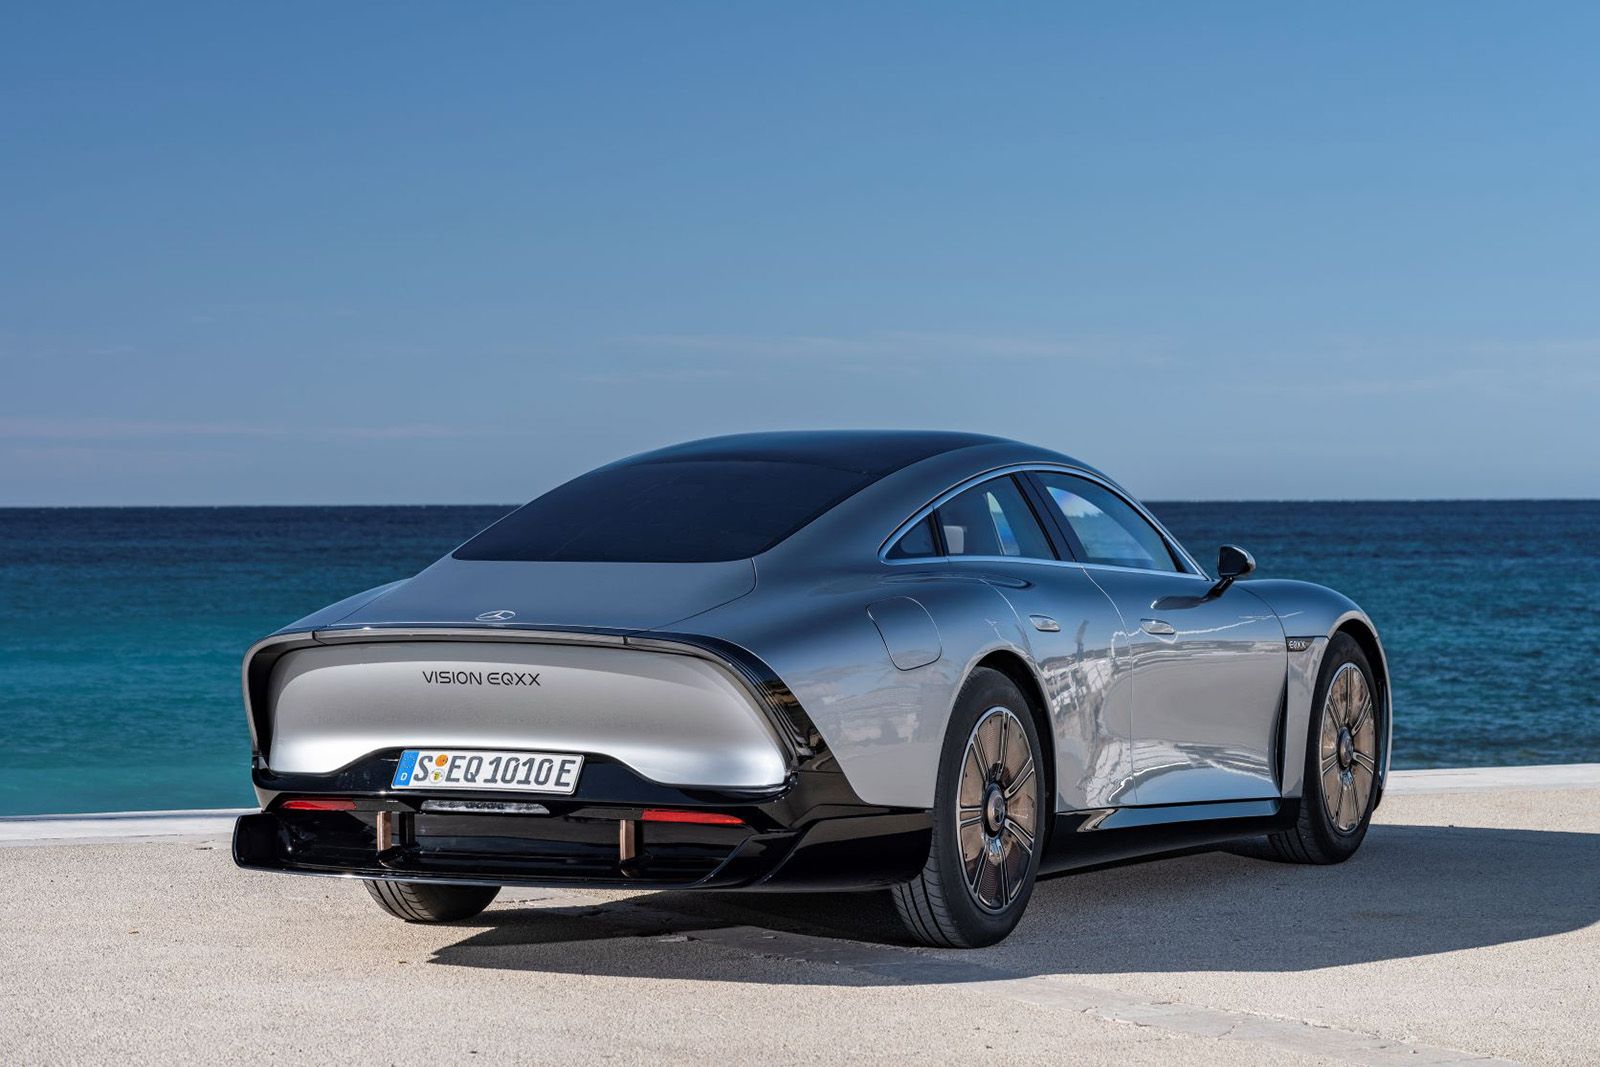 Mercedes-Benz Vision EQXX travels over 1,000 km on a single battery charge photo 1